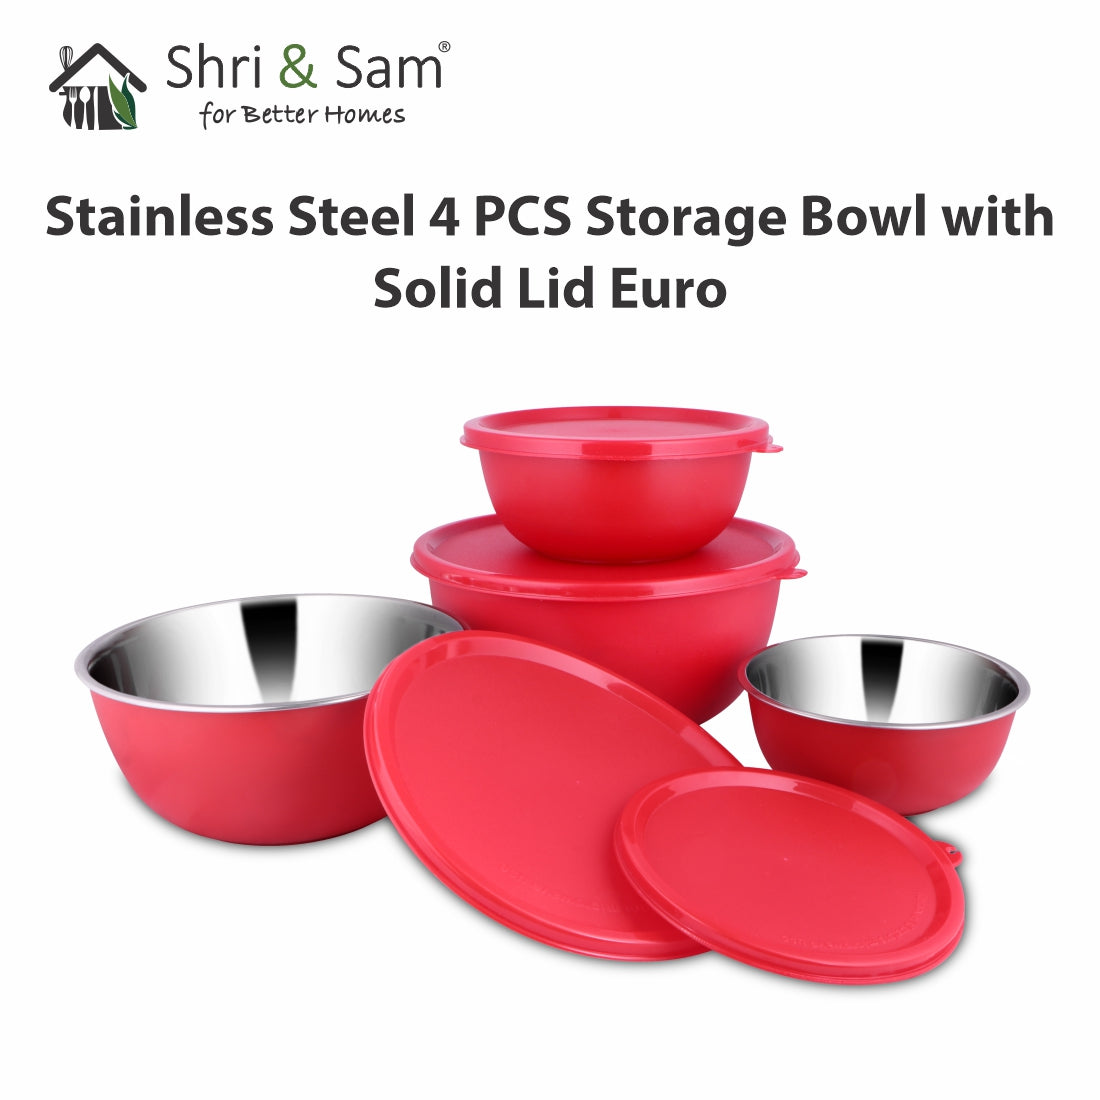 Stainless Steel 4 PCS Storage Bowl with Solid Lid Euro